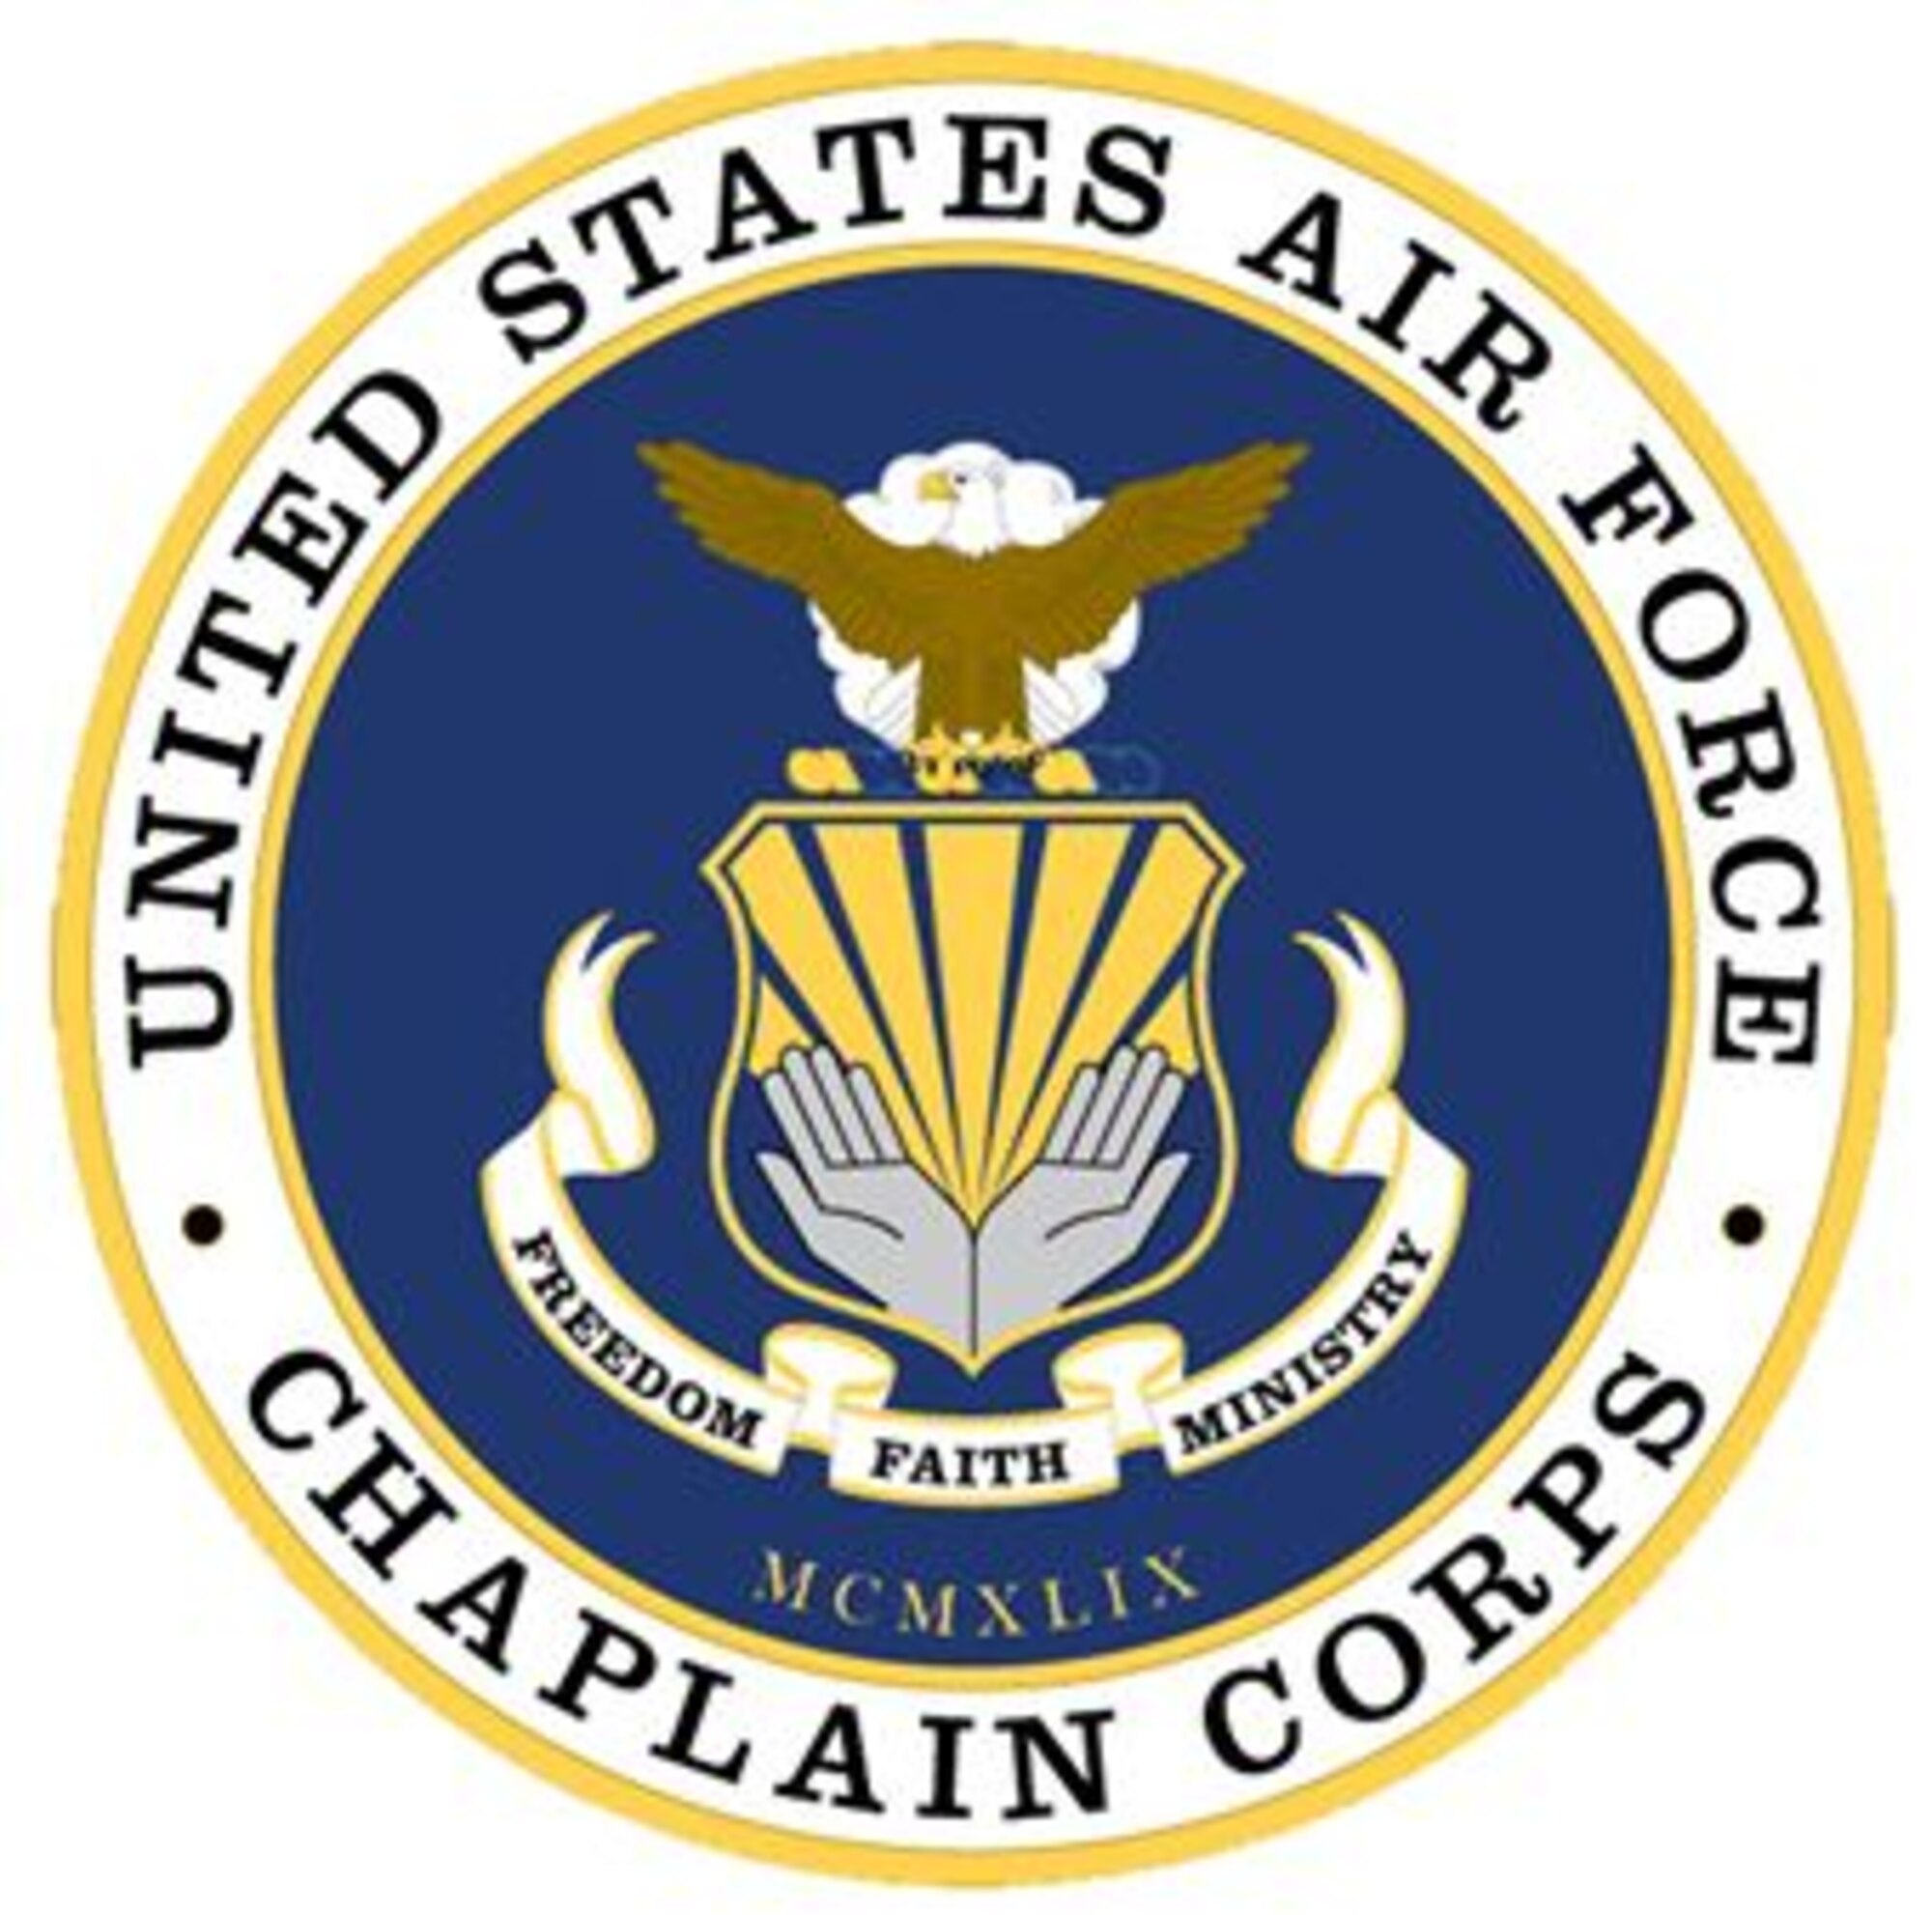 The Air Force Chaplain Corps provides spiritual care and the opportunity for Airmen, their families, and other authorized personnel to exercise their constitutional right to the free exercise of religion. This is accomplished through religious observances, providing pastoral care, and advising leadership on spiritual, ethical, moral, morale, core values, and religious accommodation issues.(U.S. Air Force graphic)